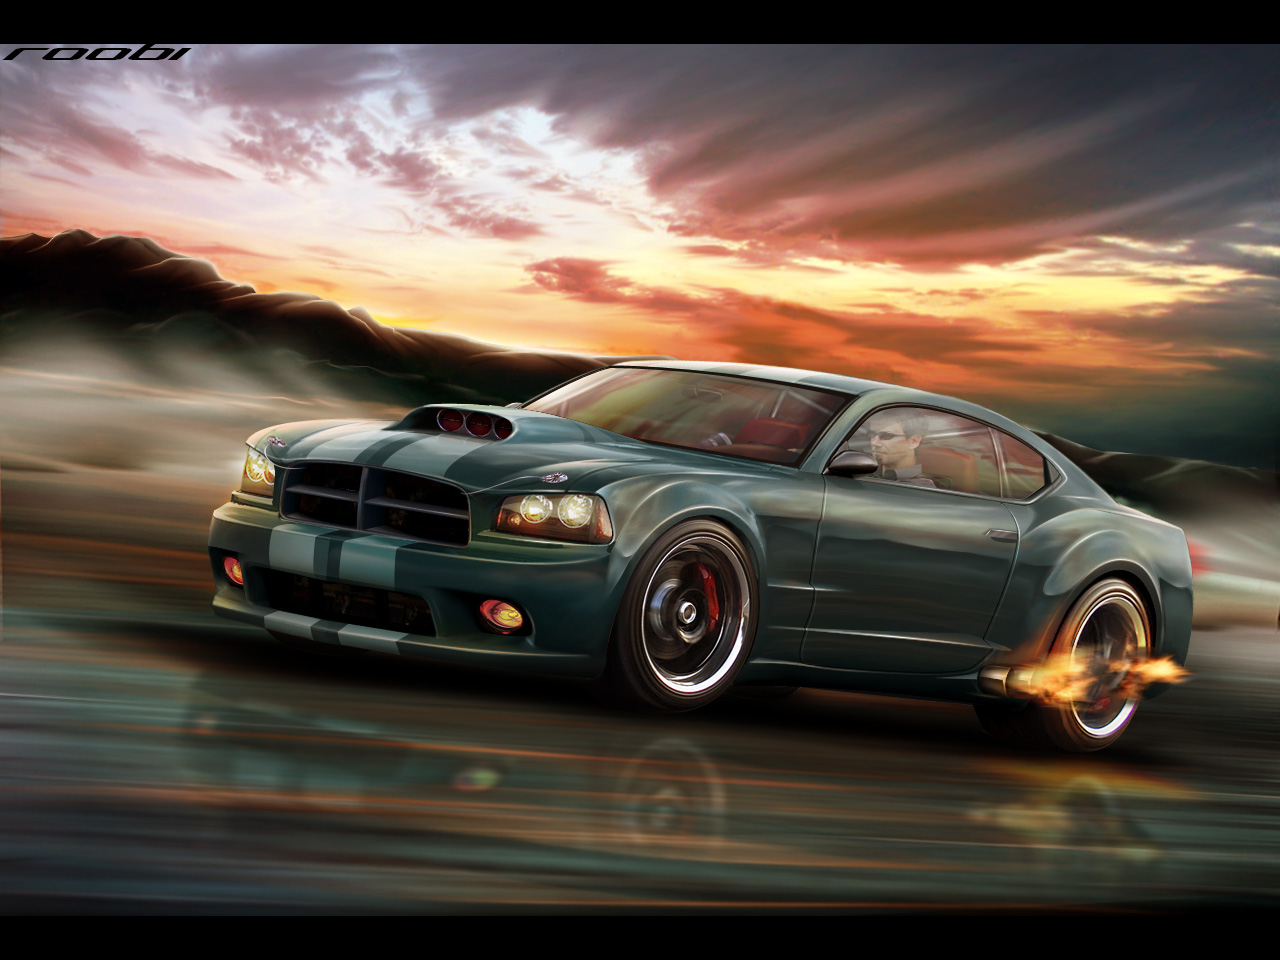 Dodge Charger by roobi